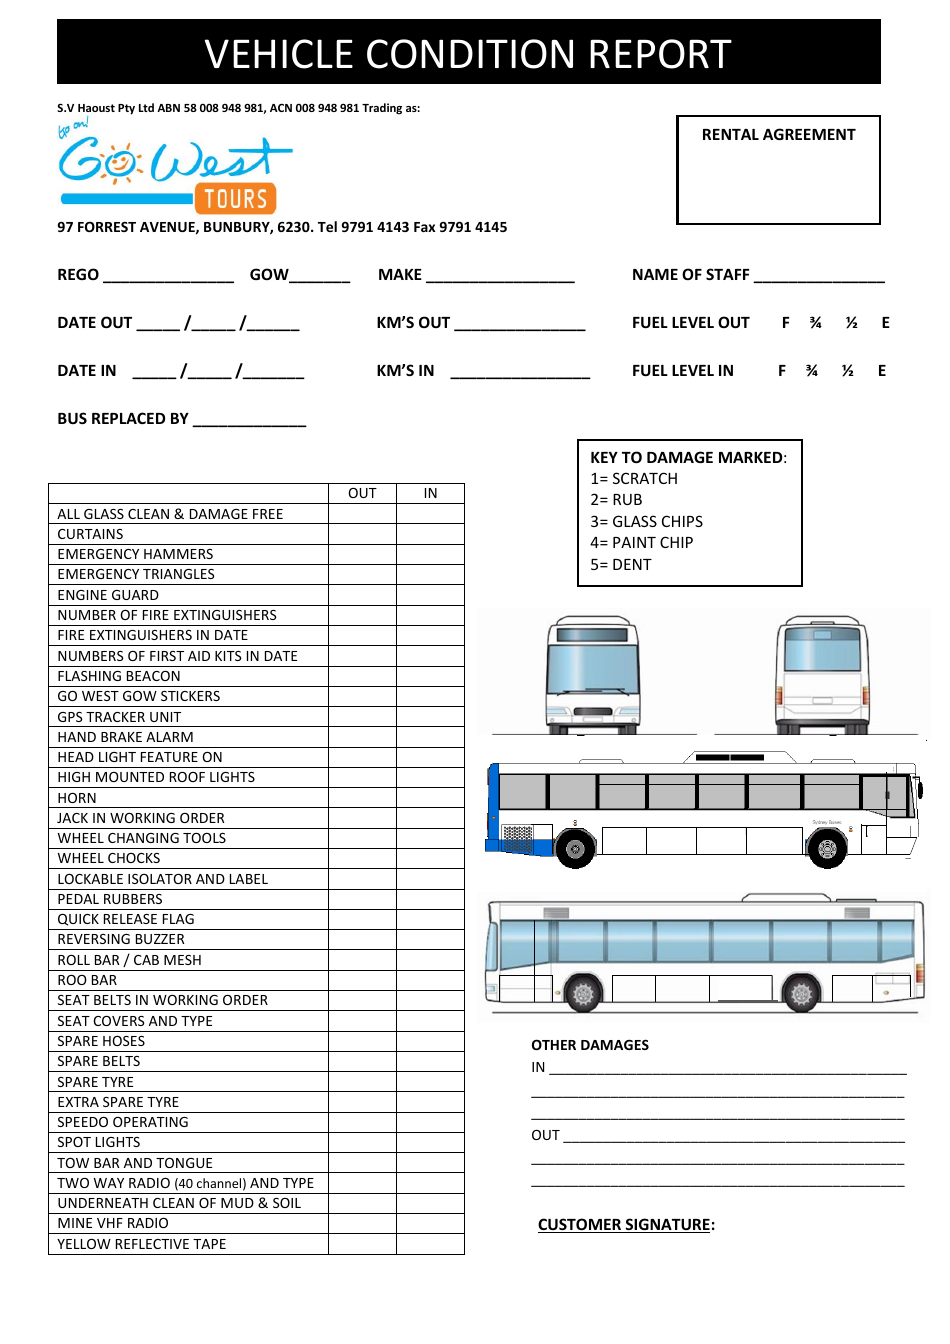 Vehicle Condition Report Template - Cowest Tours Download Intended For Truck Condition Report Template